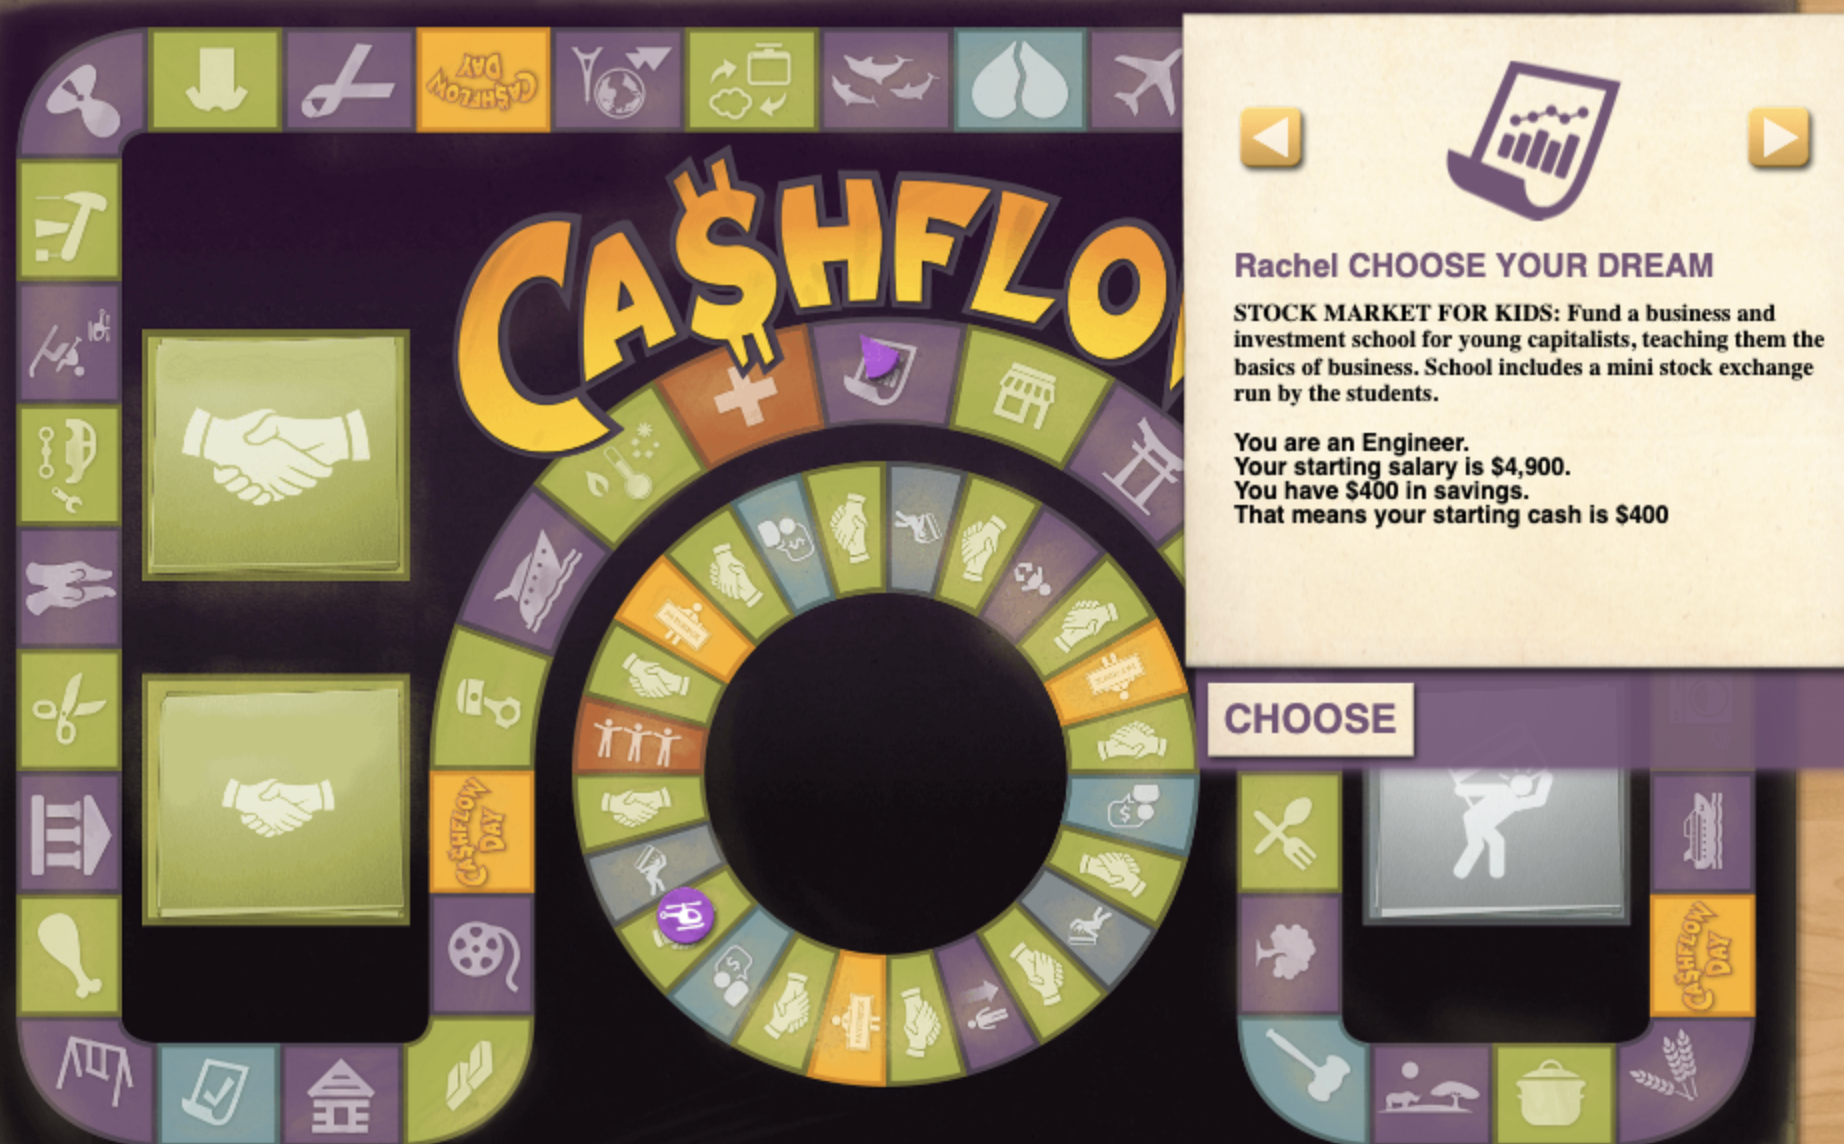 How To Play CashFlow Online for Free - Tips and Tricks to Play Fast and  Learn More! 